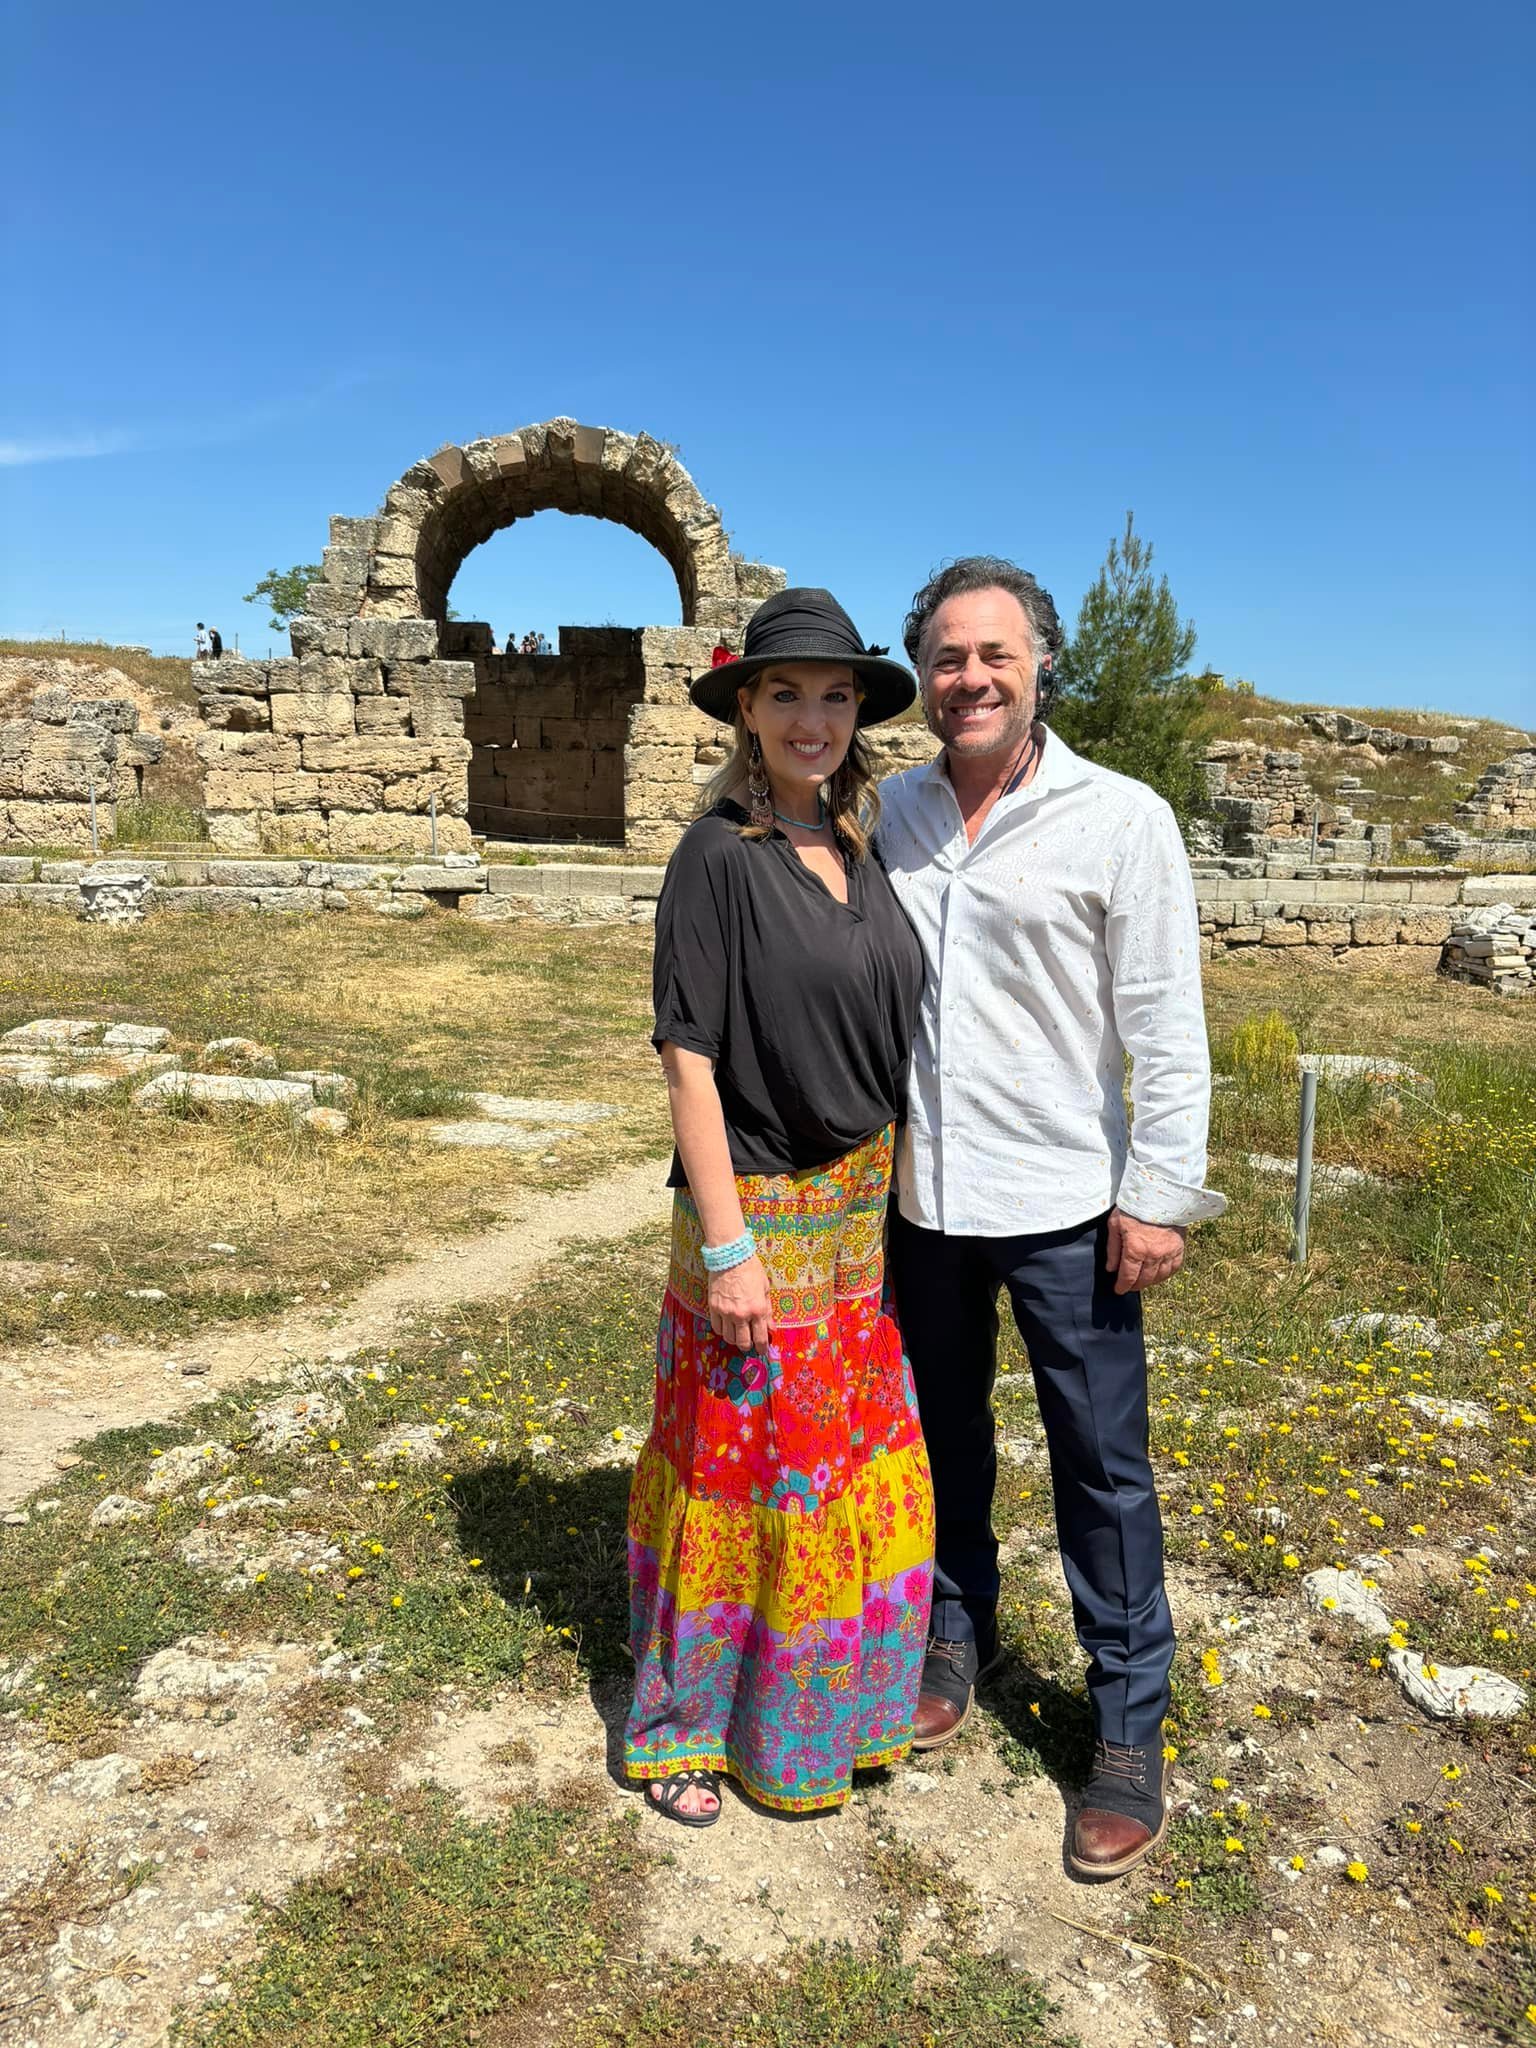 Today was filled with meaningful moments in Corinth and Mycenae, one of the oldest civilizations. Hearing Dale preach where Paul preached and walking the streets Priscilla walked were moments I&rsquo;ll never forget. 

As I stood in the ruins of behe